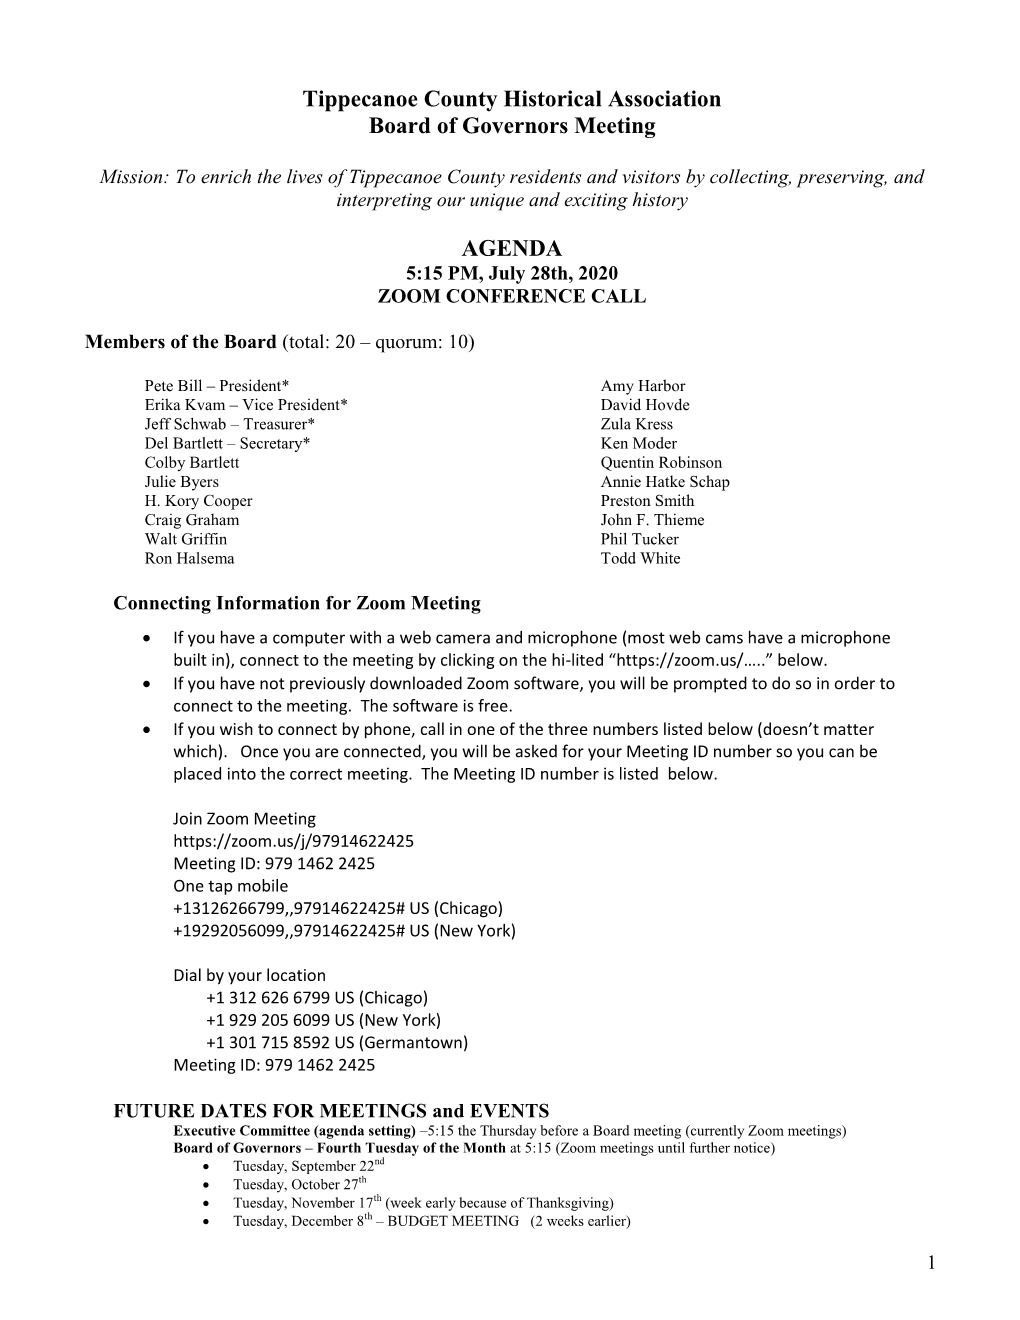 Board Meeting Agenda and Minutes August 25, 2020